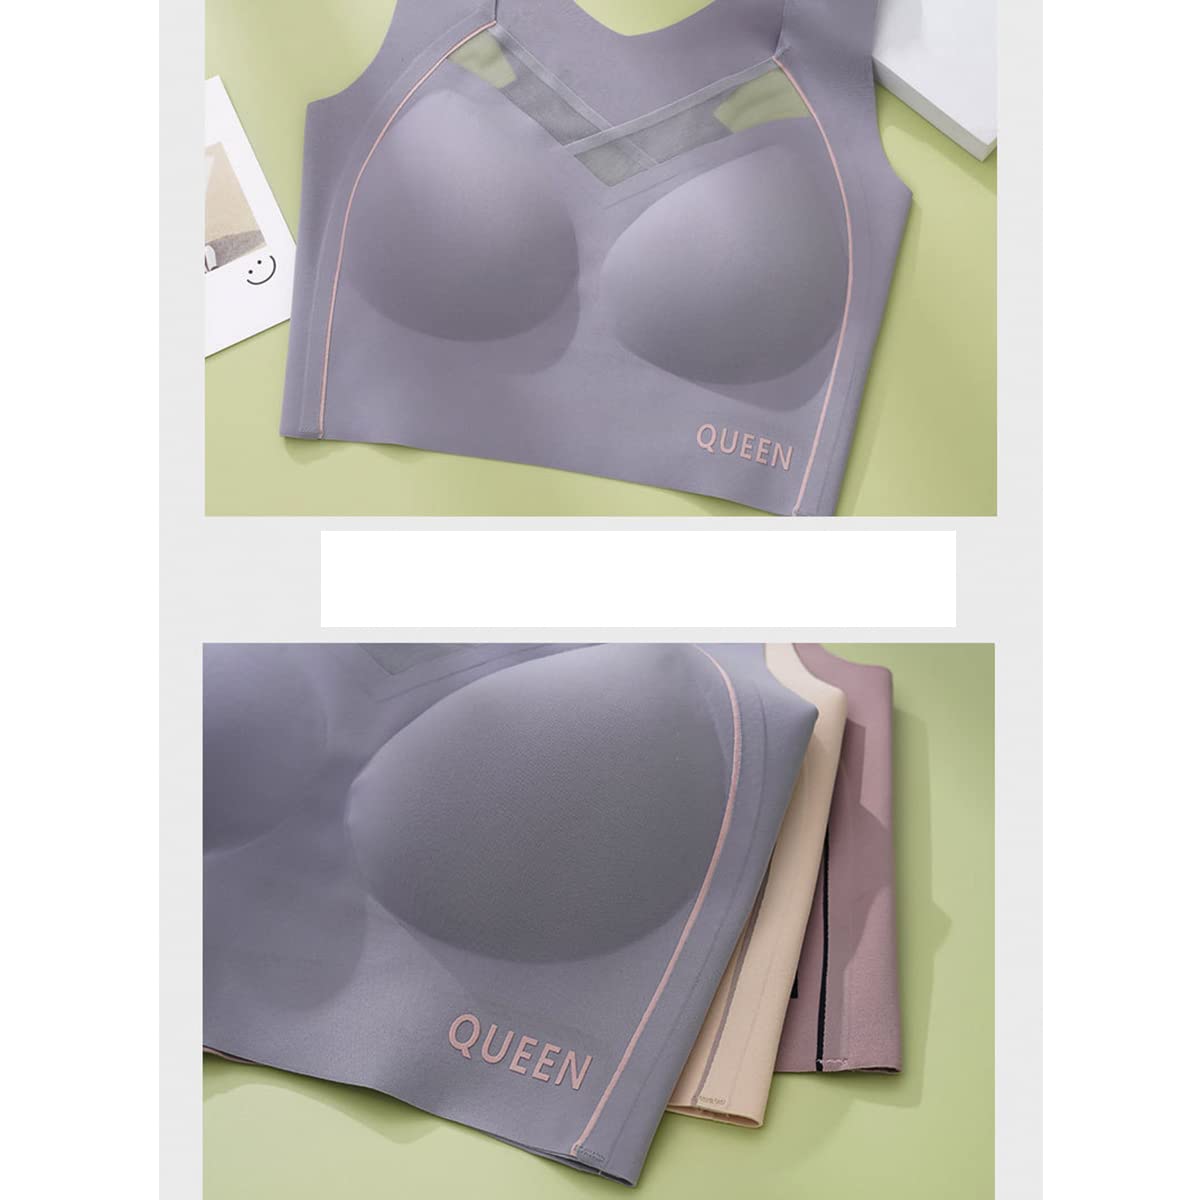 Full Cup Pads Large Size Breathable Bras for Ladys Women